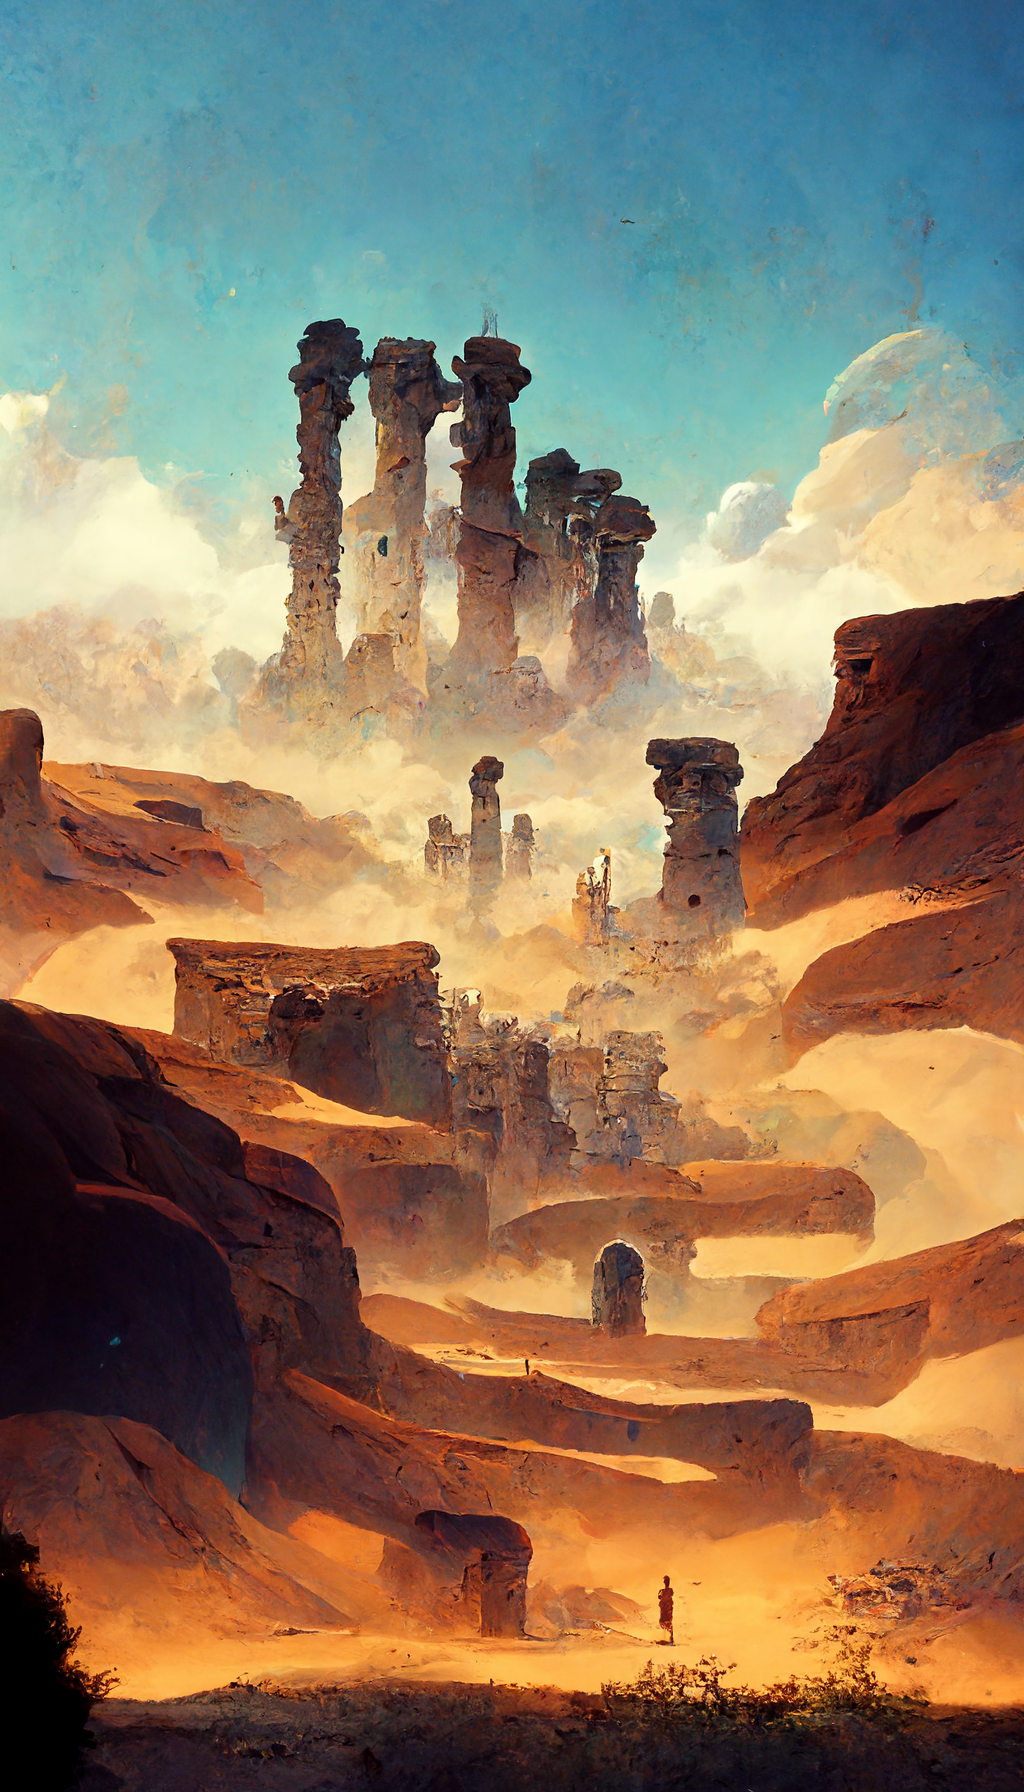 Ruins rise up from the sand of a desert landscape.